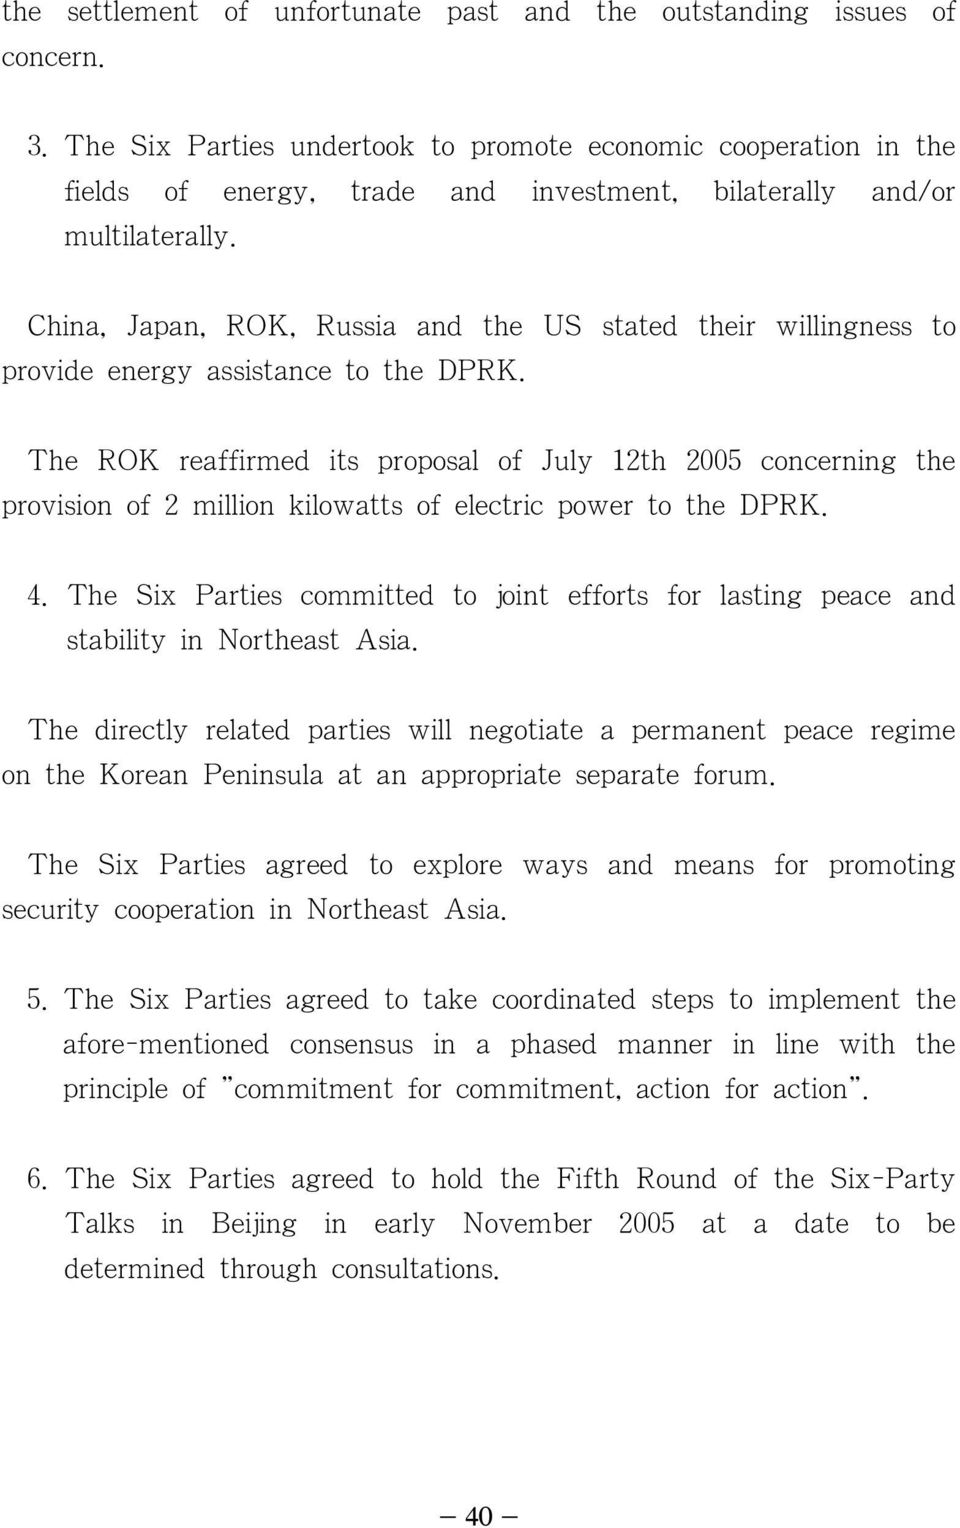 China, Japan, ROK, Russia and the US stated their willingness to provide energy assistance to the DPRK.